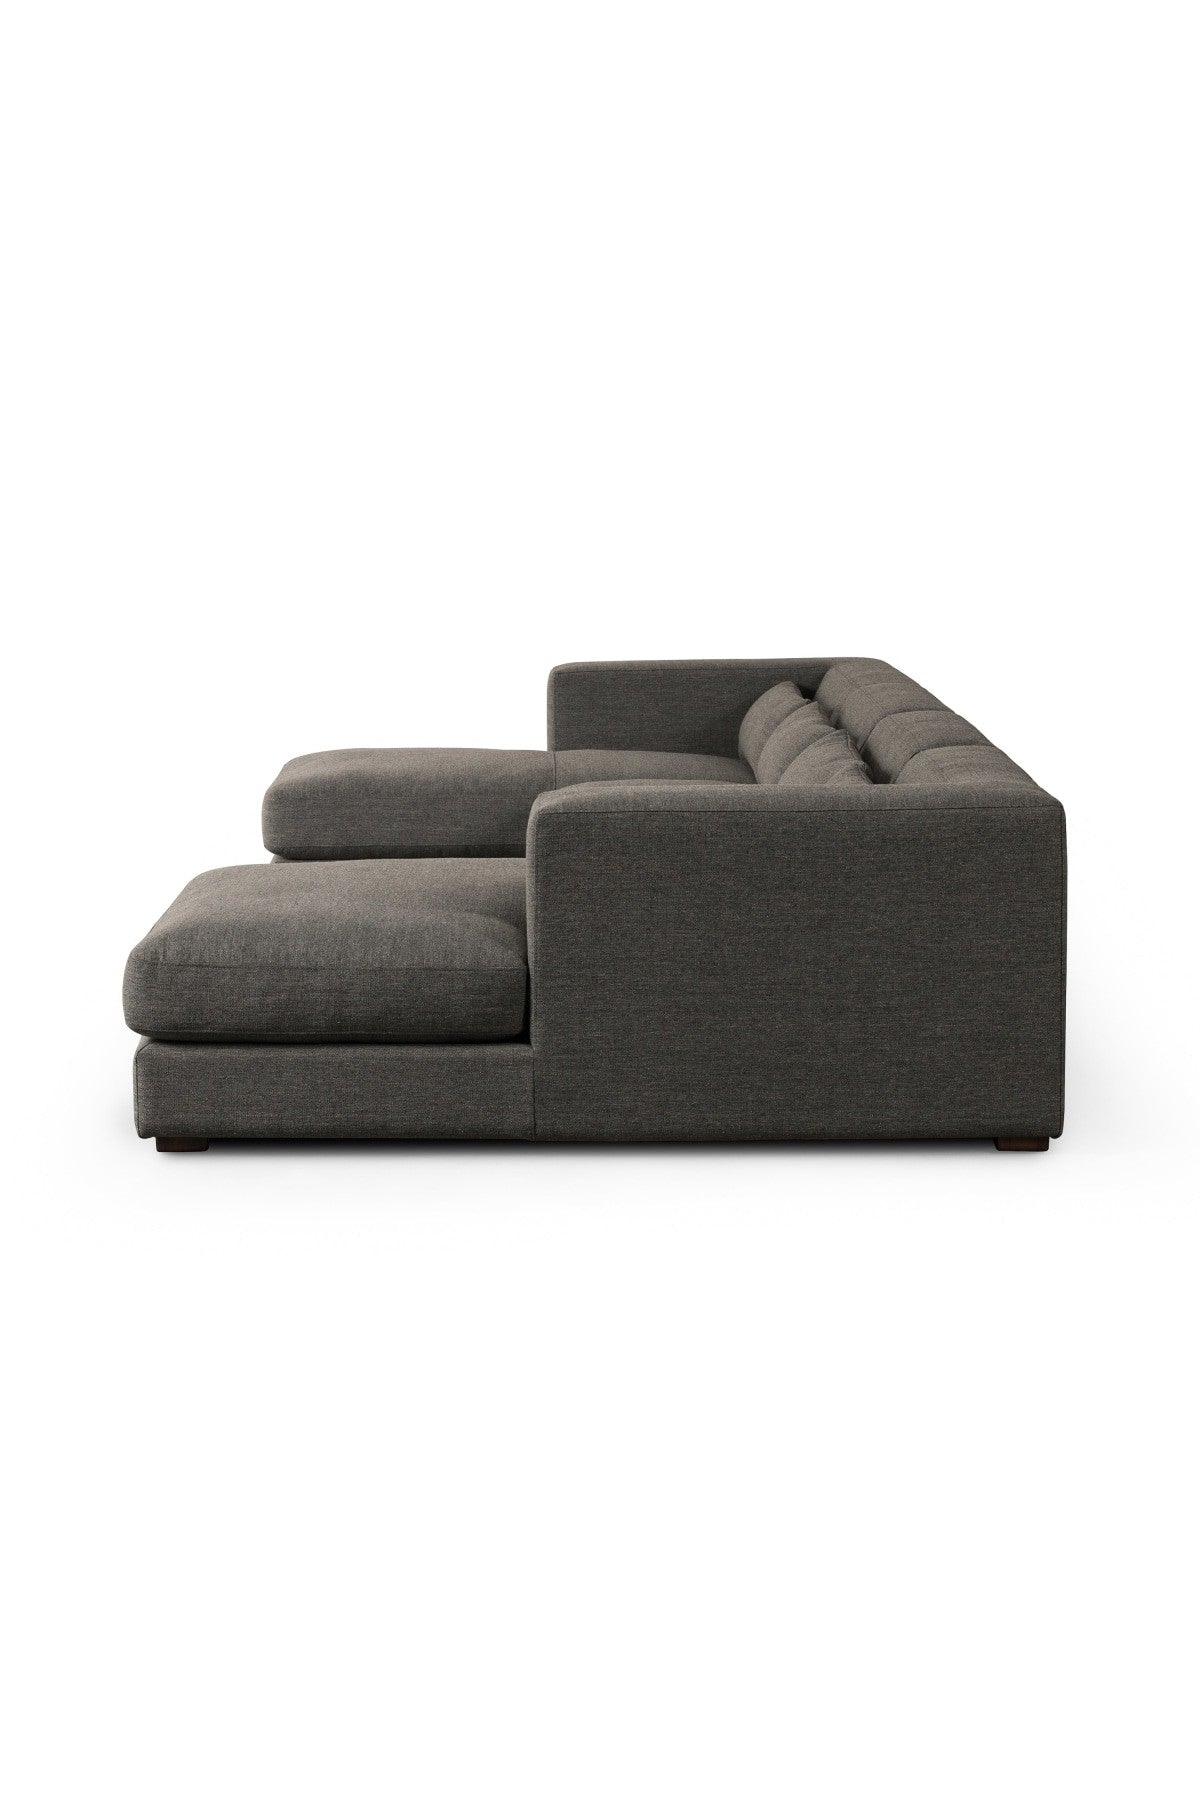 Senna Double Chaise Sectional